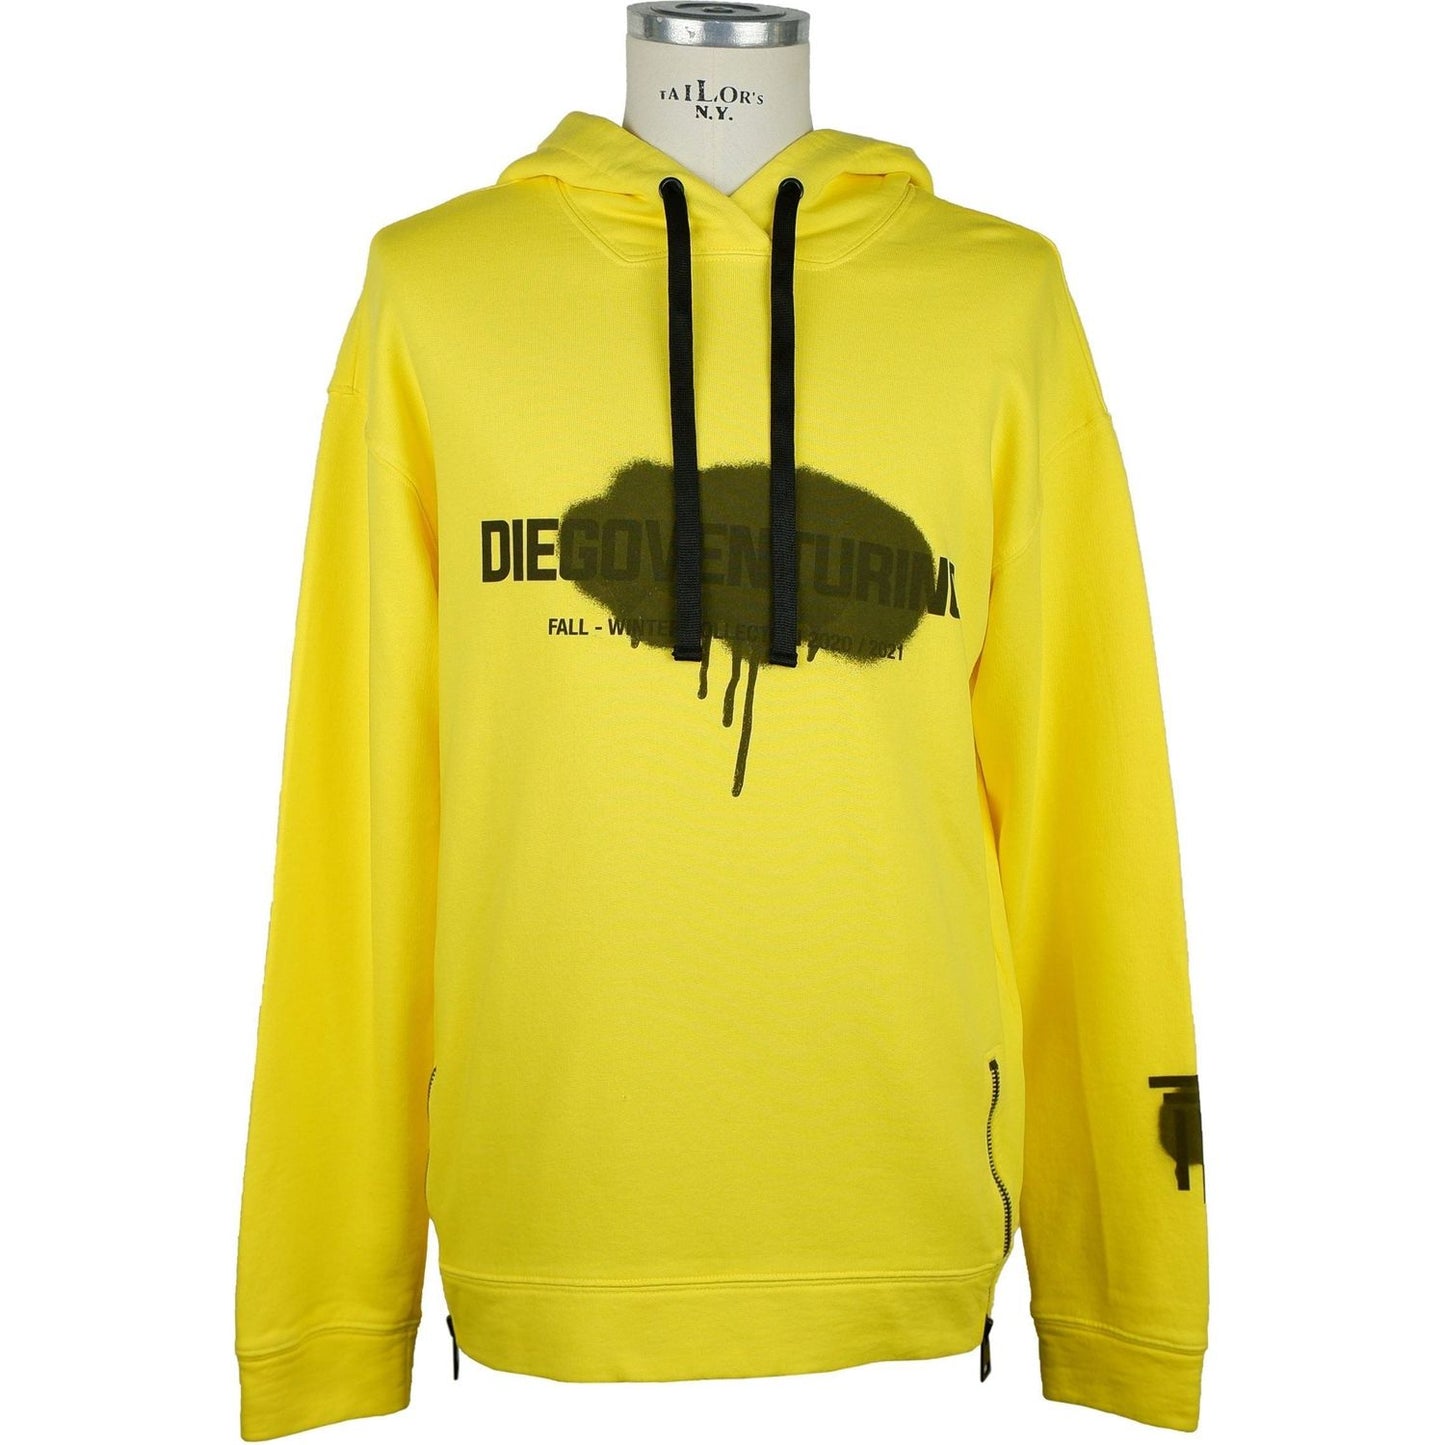 Diego Venturino Elevate Your Style: Sunshine Yellow Cotton Hoodie dndflhlvs-yellow-diego-venturino-sweater MAN SWEATERS product-6841-593960043-scaled-5d8ab3ef-a23.jpg